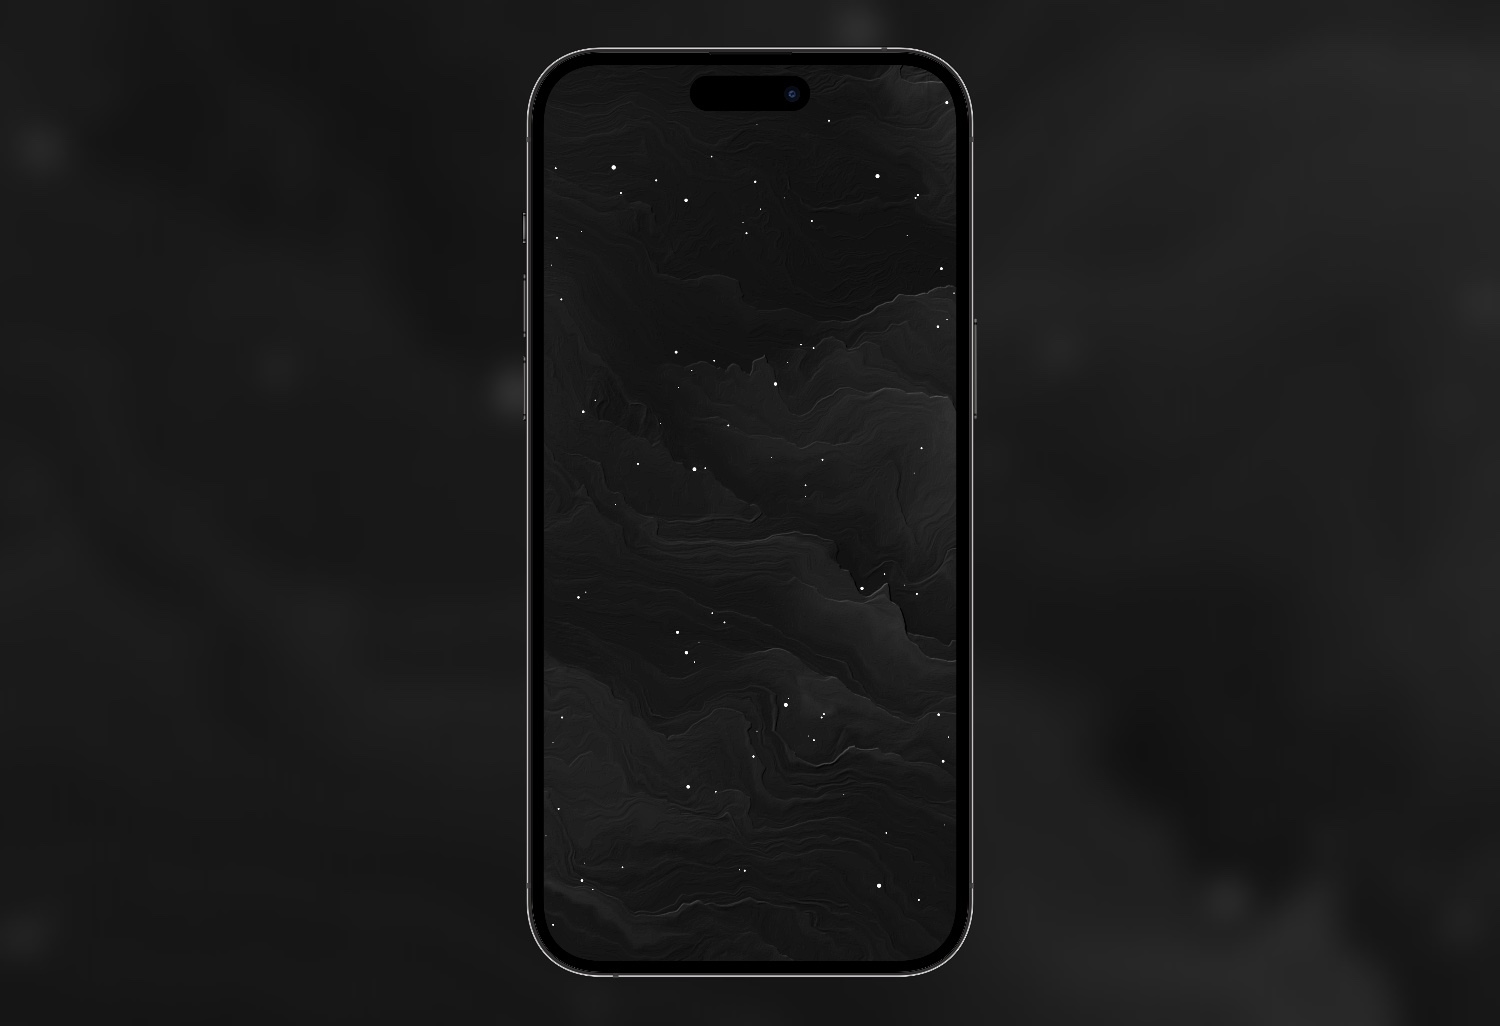 Lost With Stars 2 - Wallpaper - The iDevice Blog